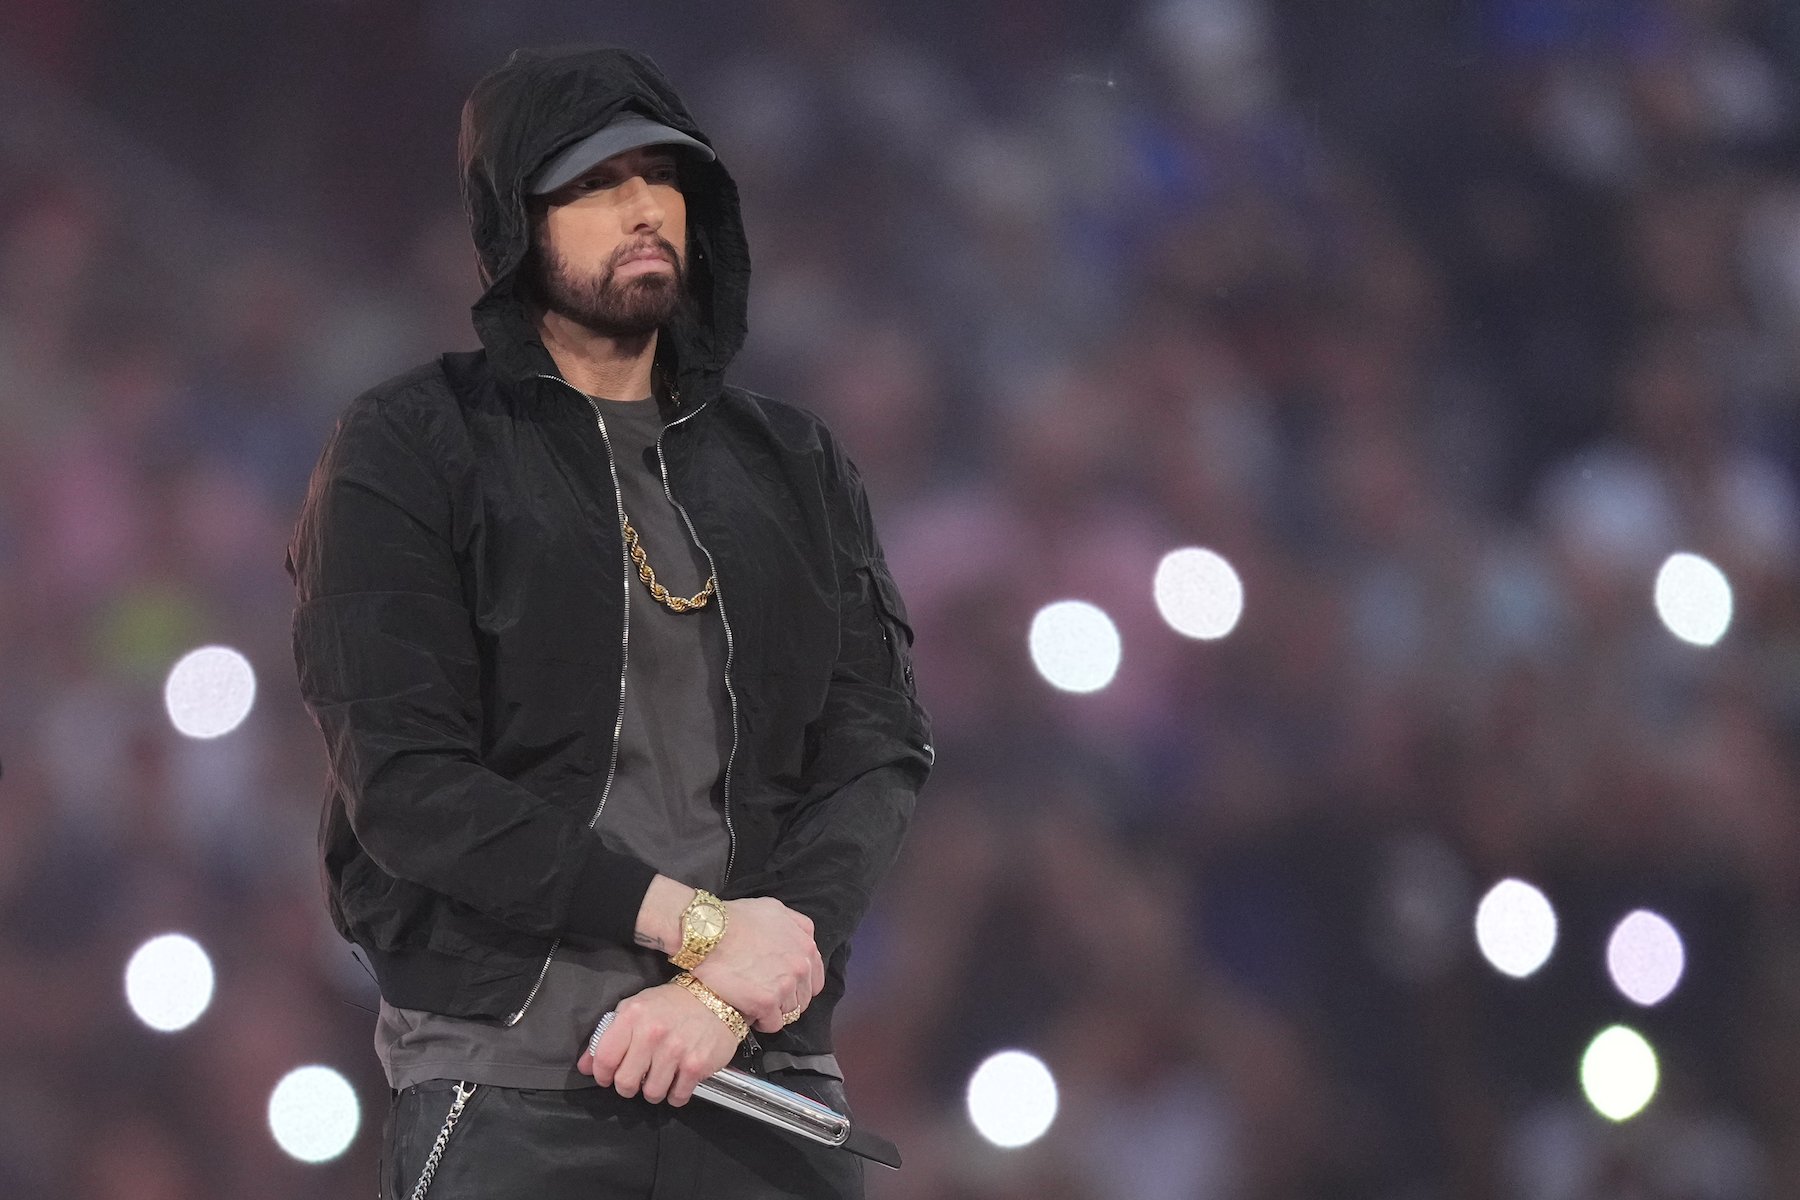 Eminem, who was friends with Detroit rapper Proof, performing at the Super Bowl